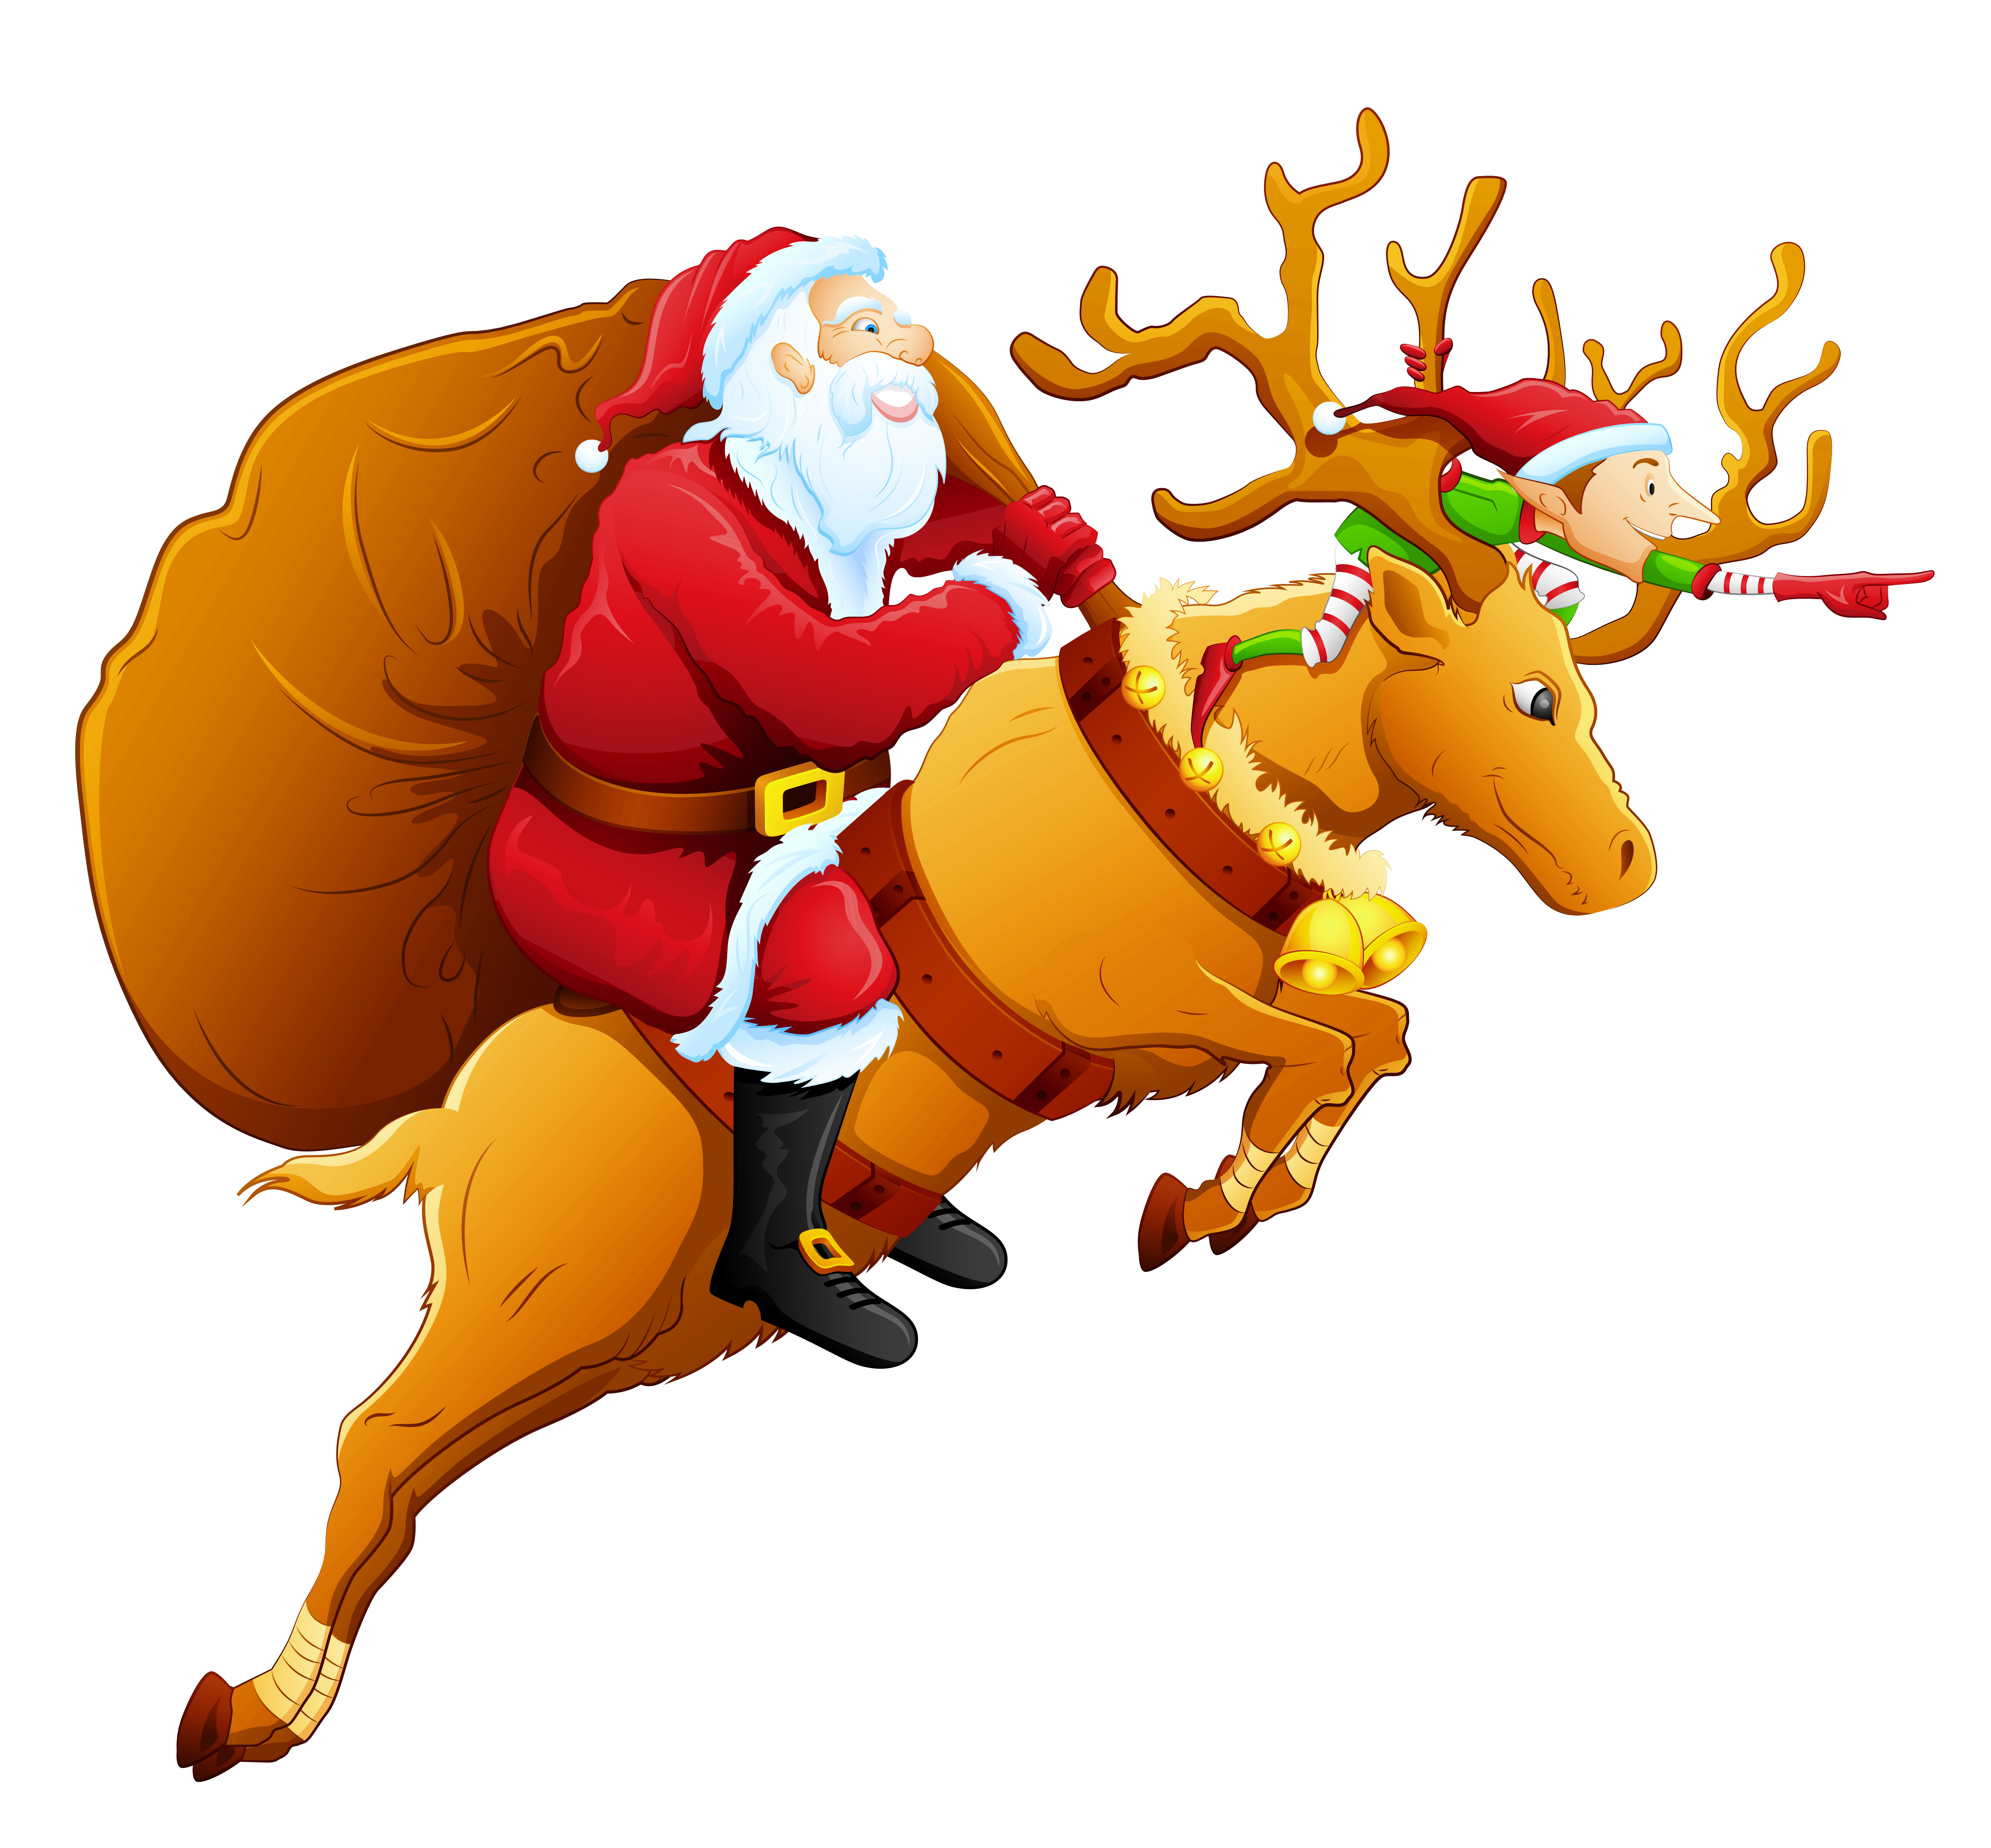 Win Treat The Reindeer Santa And Clipart. Snowjet.co 